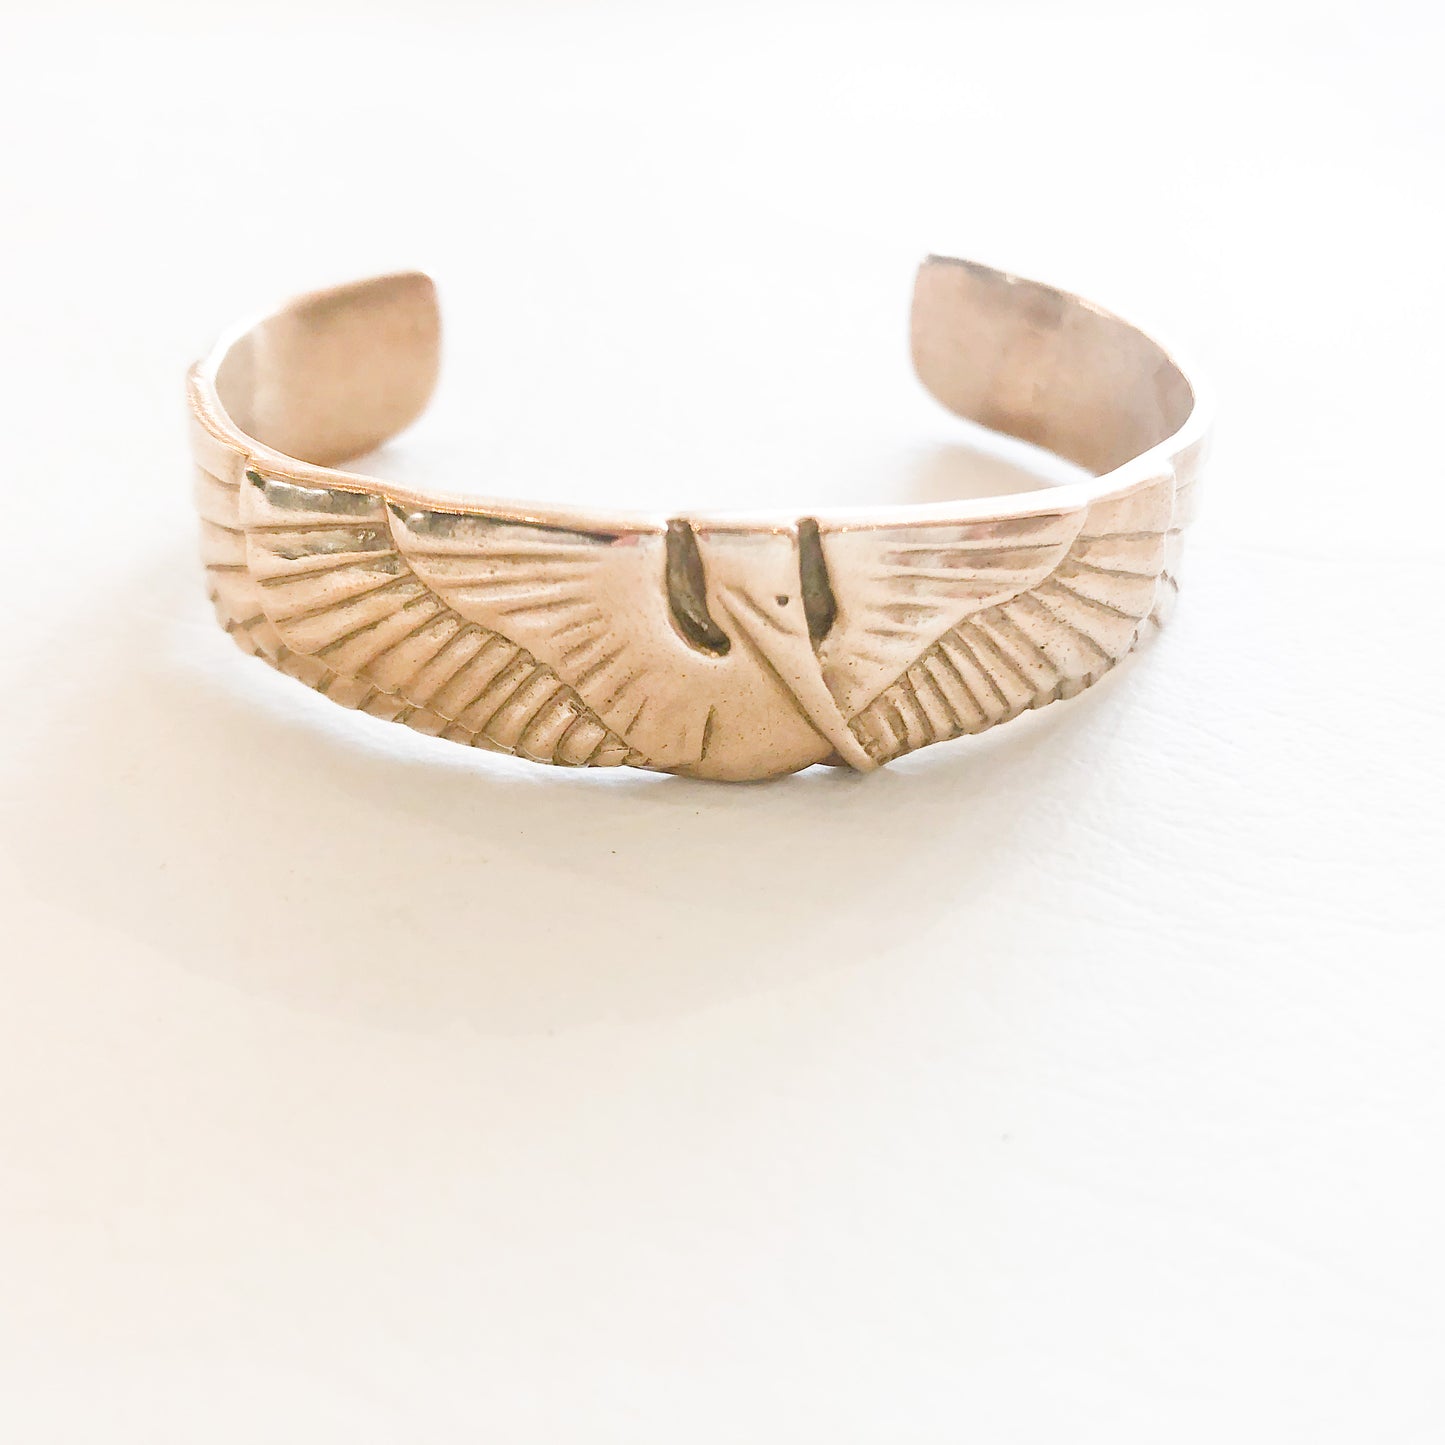 Mimosa Handcrafted- Petite Pelican Cuff